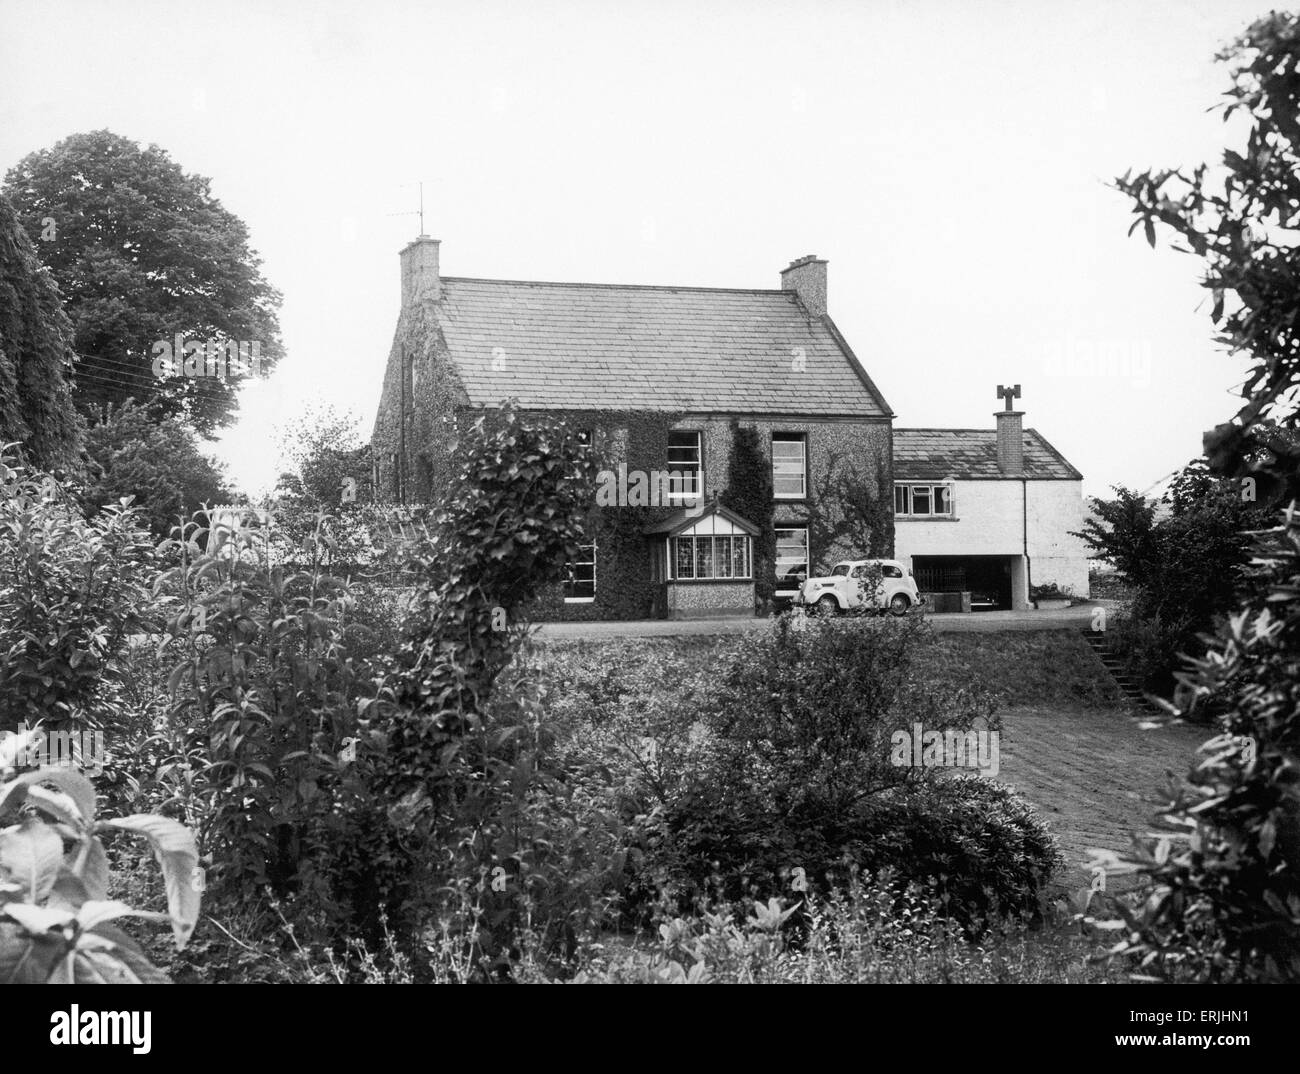 Le Lieutenant-colonel Robert Blair '' Paddy Mayne's house in Dalby, County Down. Vers décembre 1965 Banque D'Images